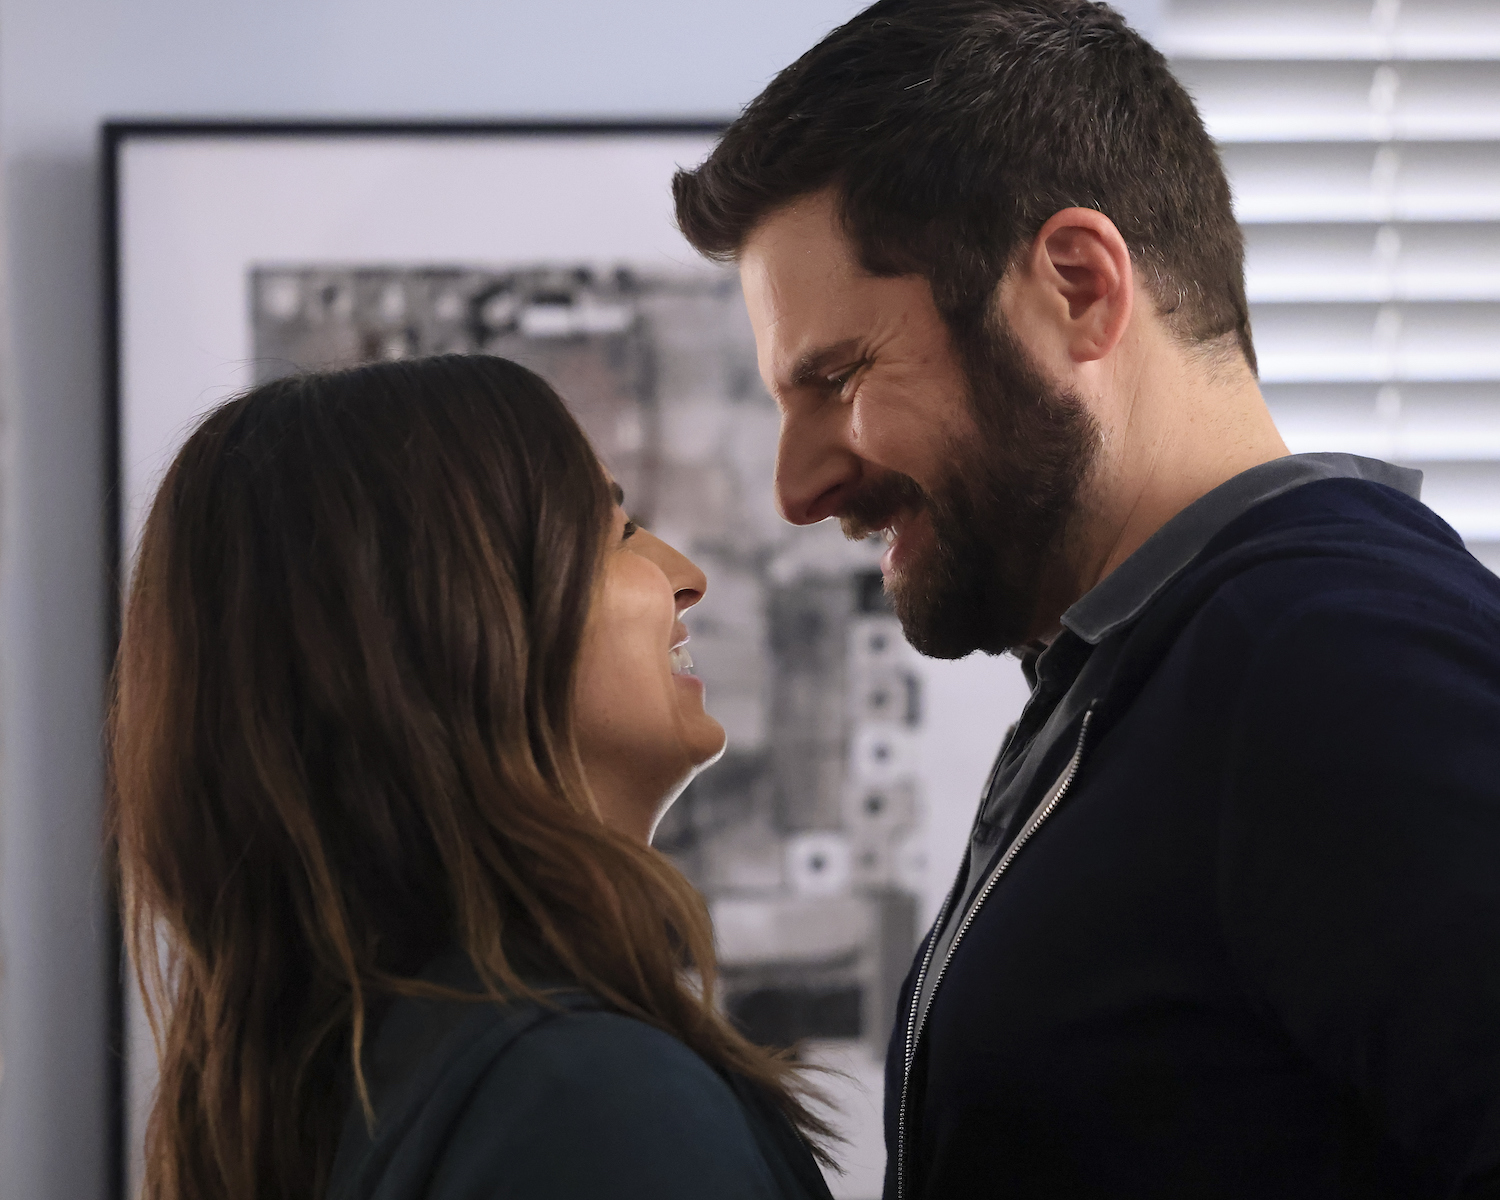 Floriana Lima as Darcy and James Roday Rodriguez as Gary in A Million Little Things - Season 3